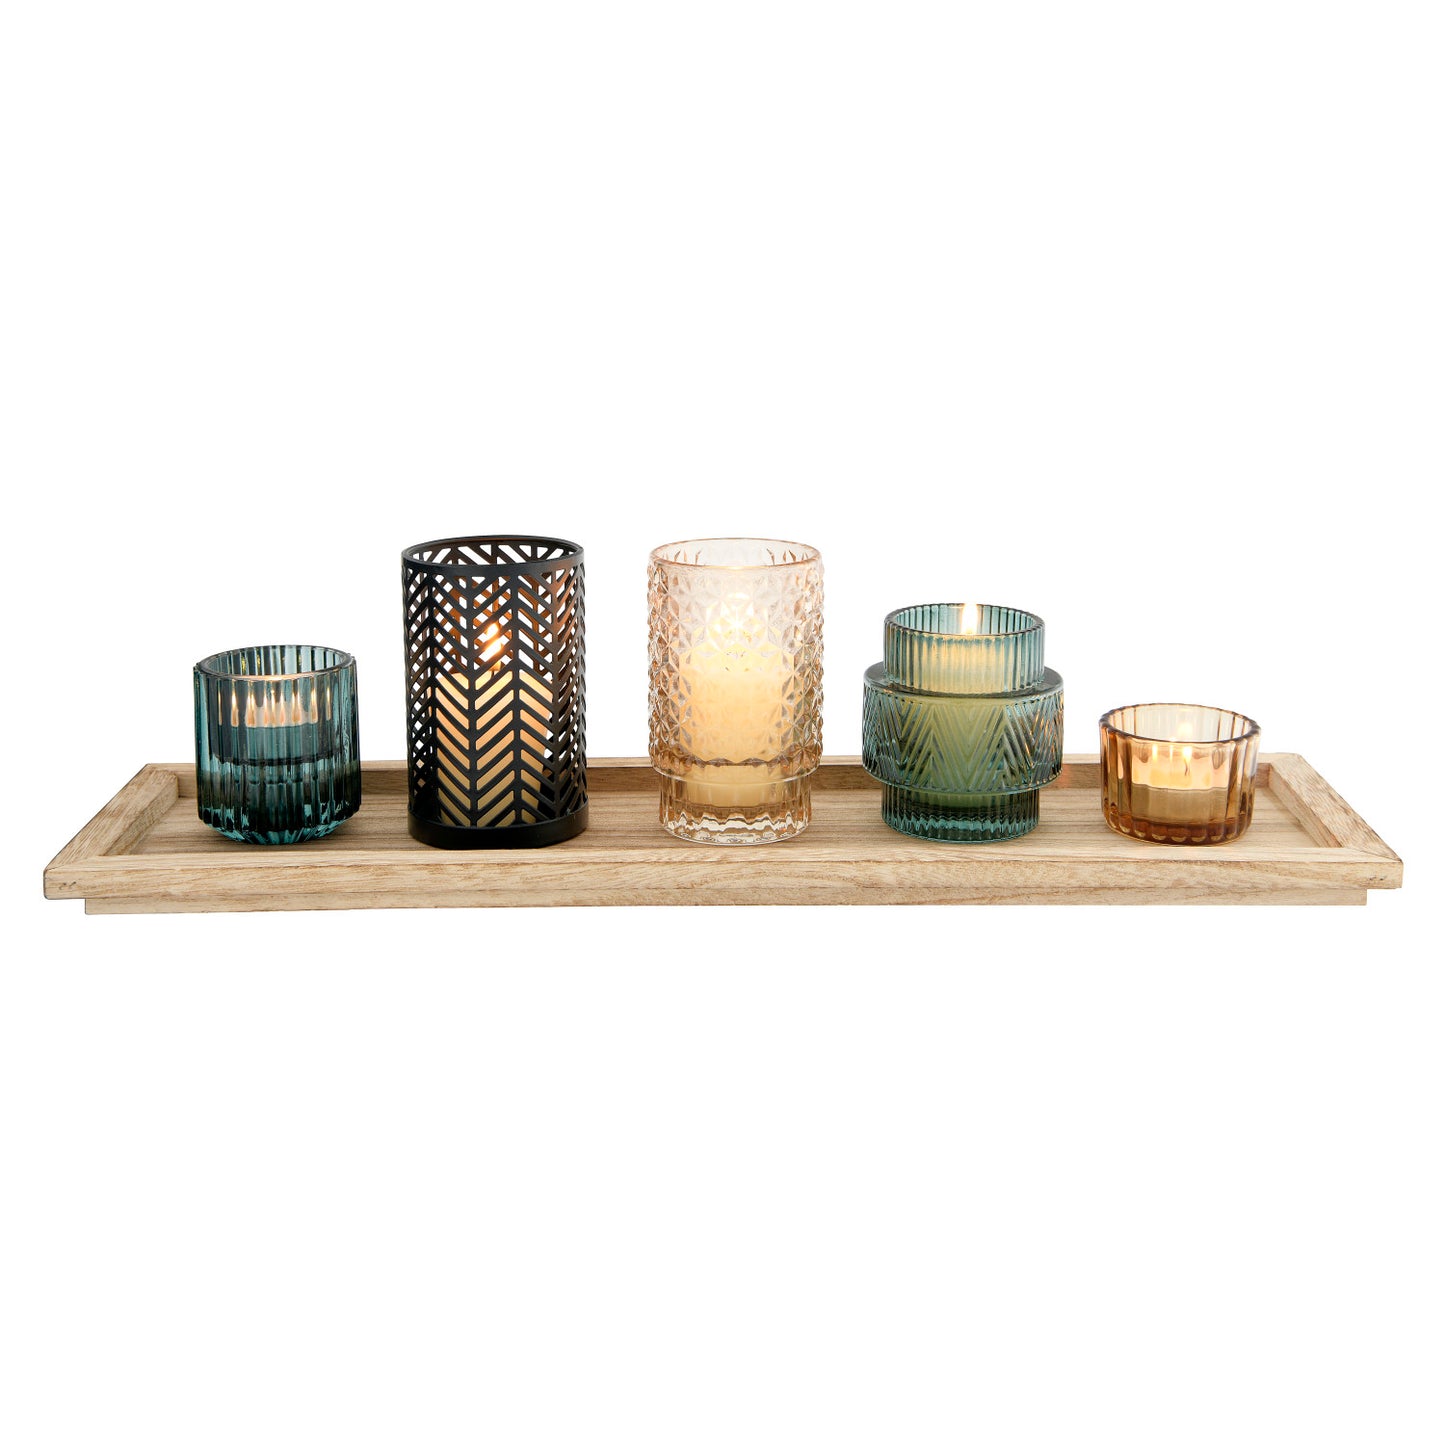 Tealight/Votive Holders with Tray, Set of 6